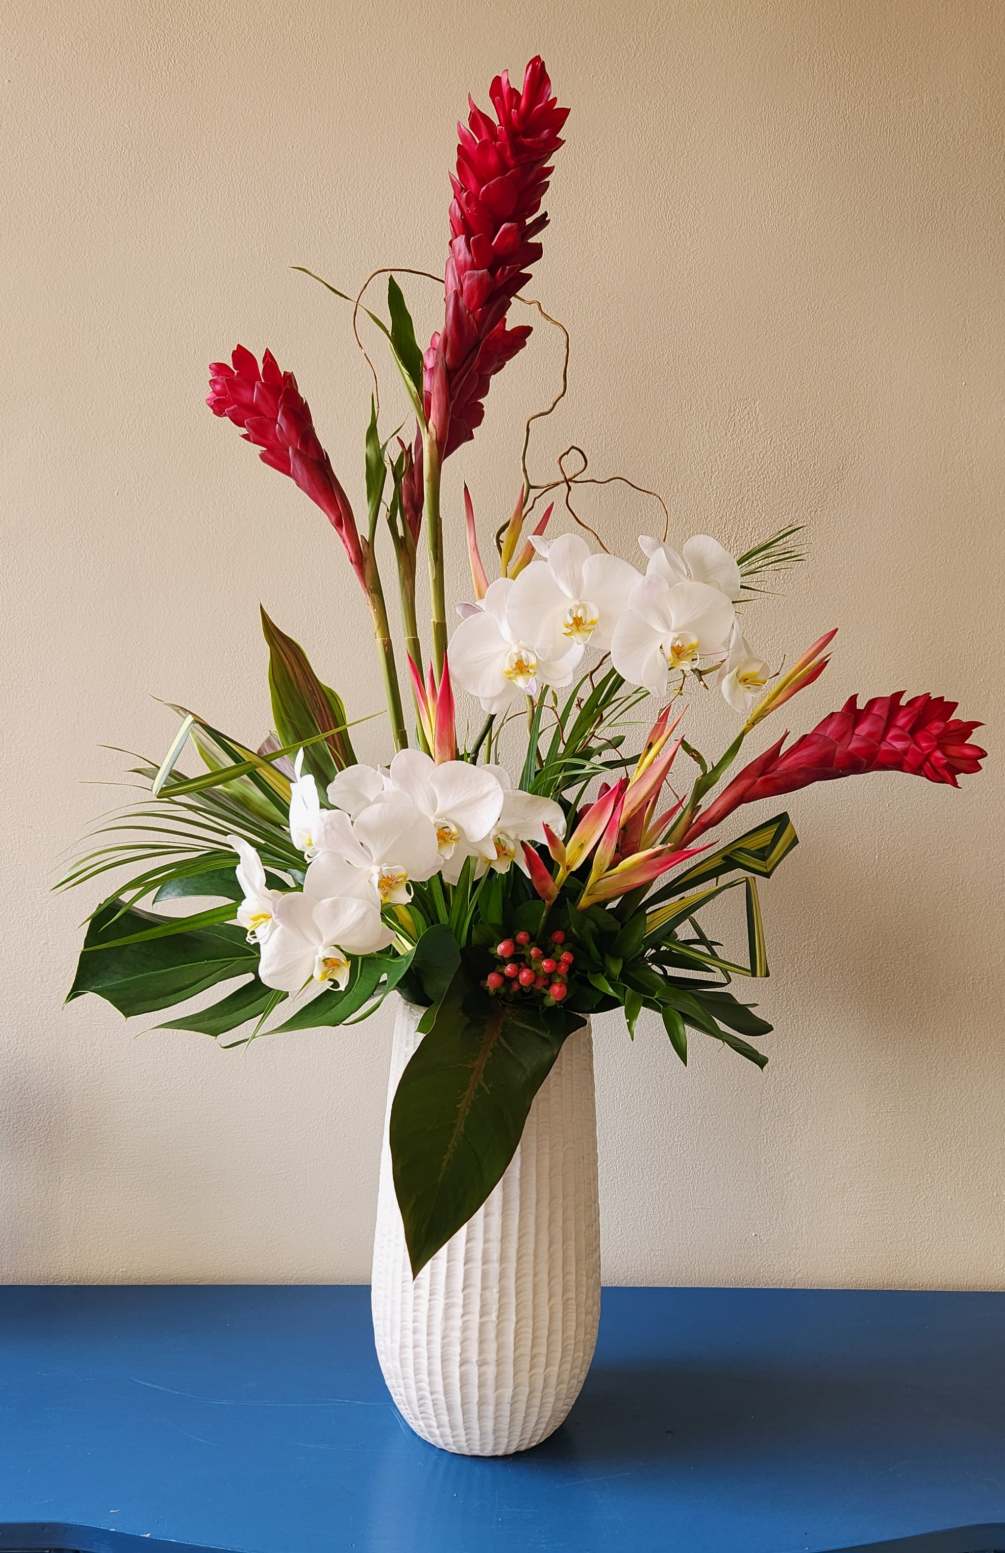 We will choose the freshest quality blooms for a tropical mix arrangement.
Flowers